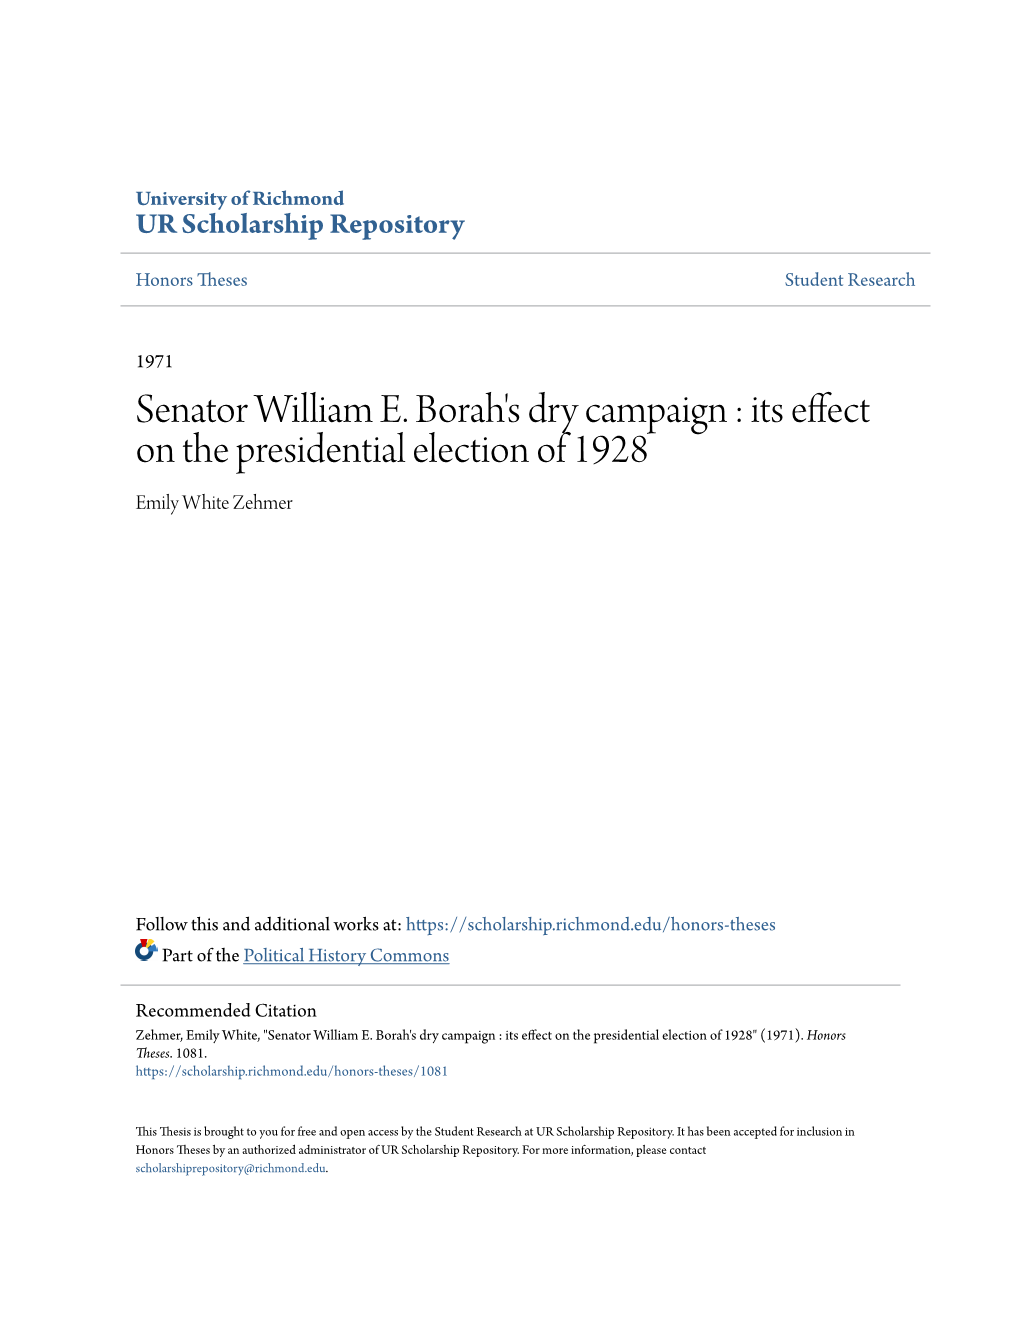 Senator William E. Borah's Dry Campaign : Its Effect on the Presidential Election of 1928 Emily White Zehmer